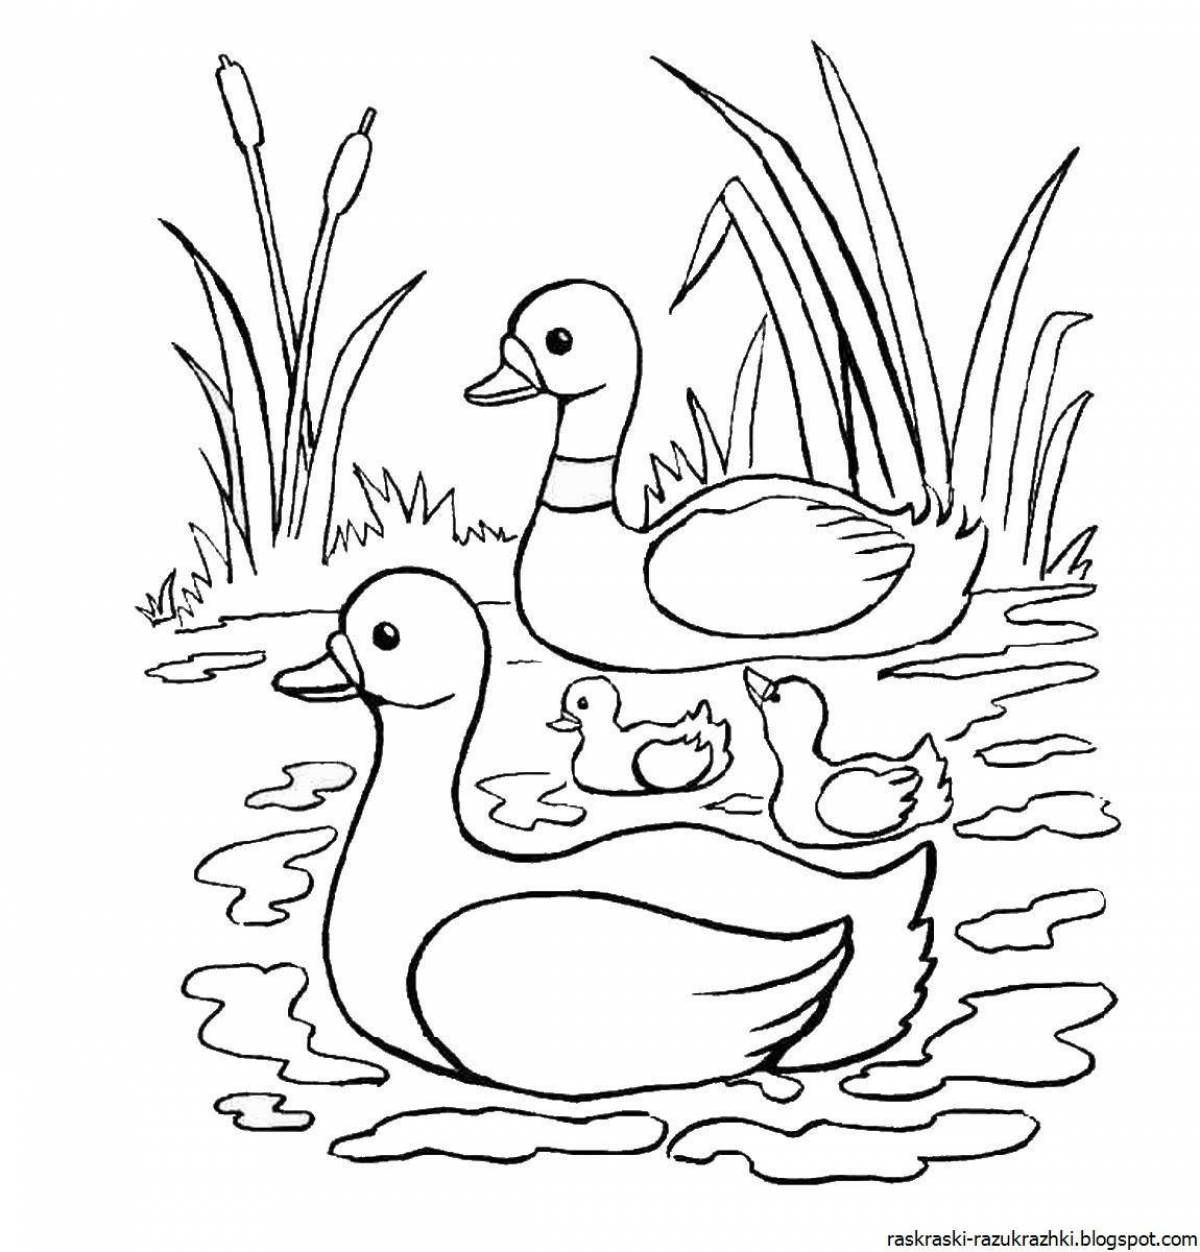 Lalafanfan the adorable duck coloring page